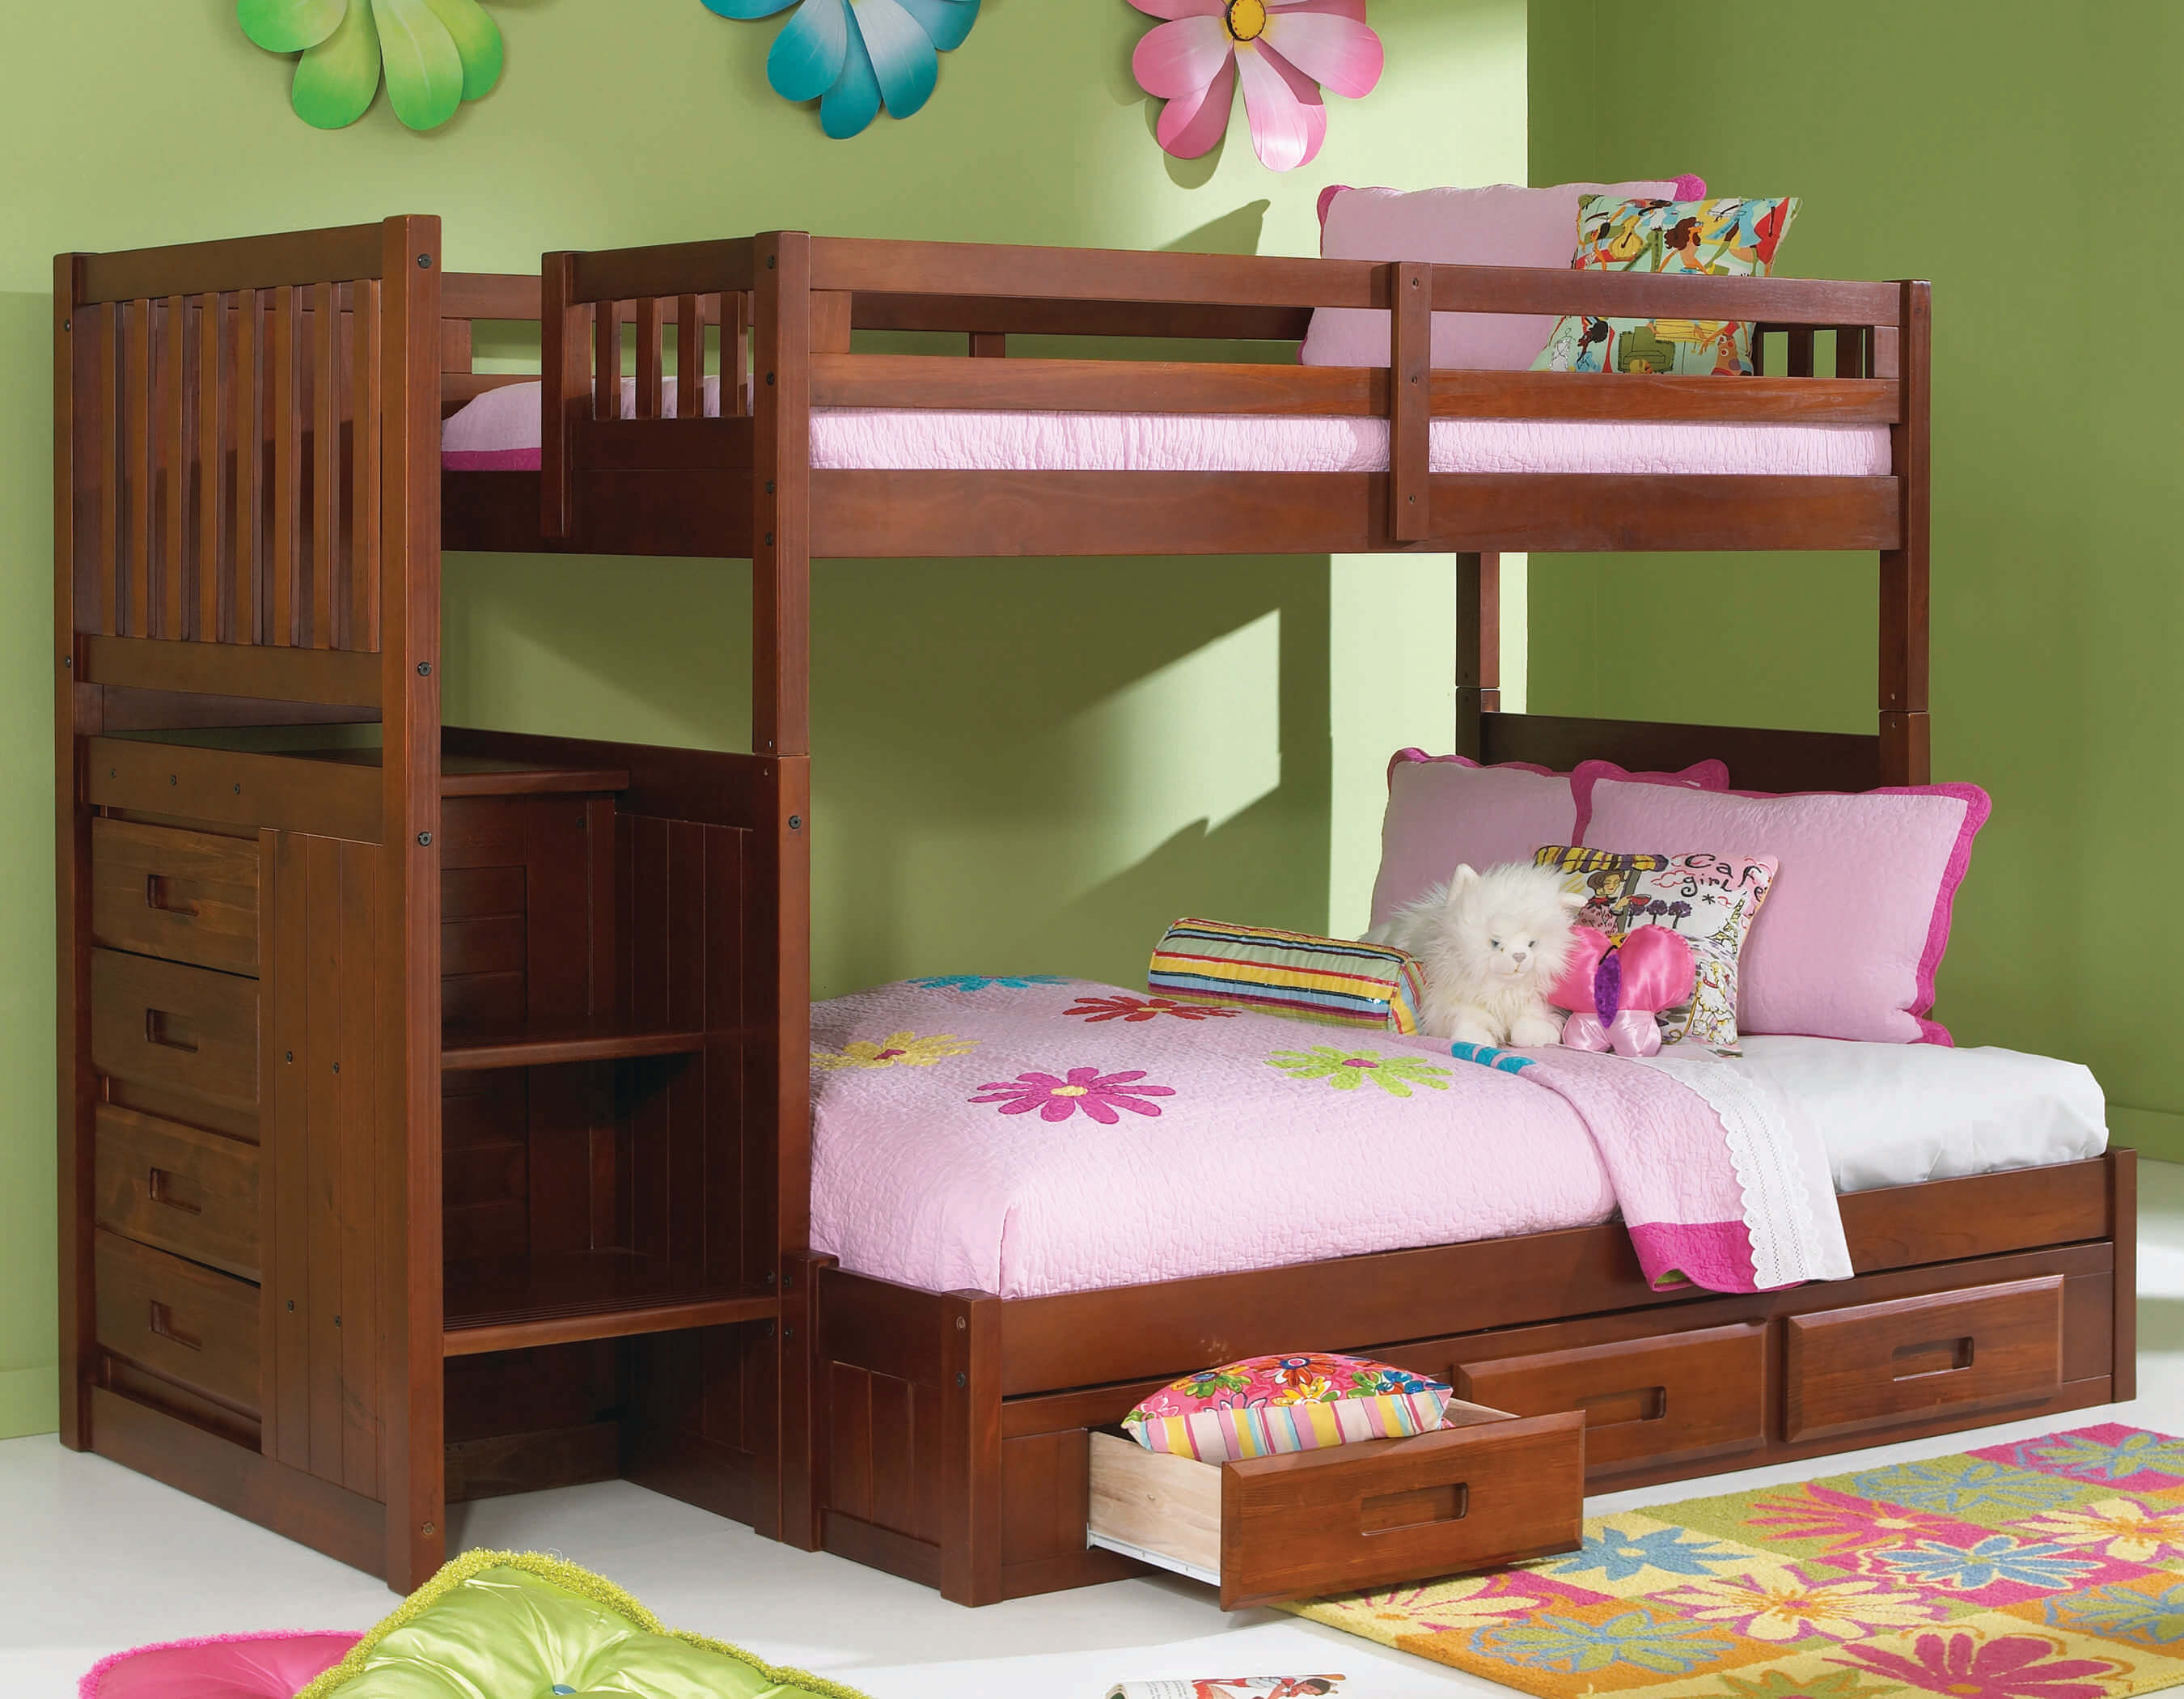 How do you check the safety of bunk beds for sale by owner?